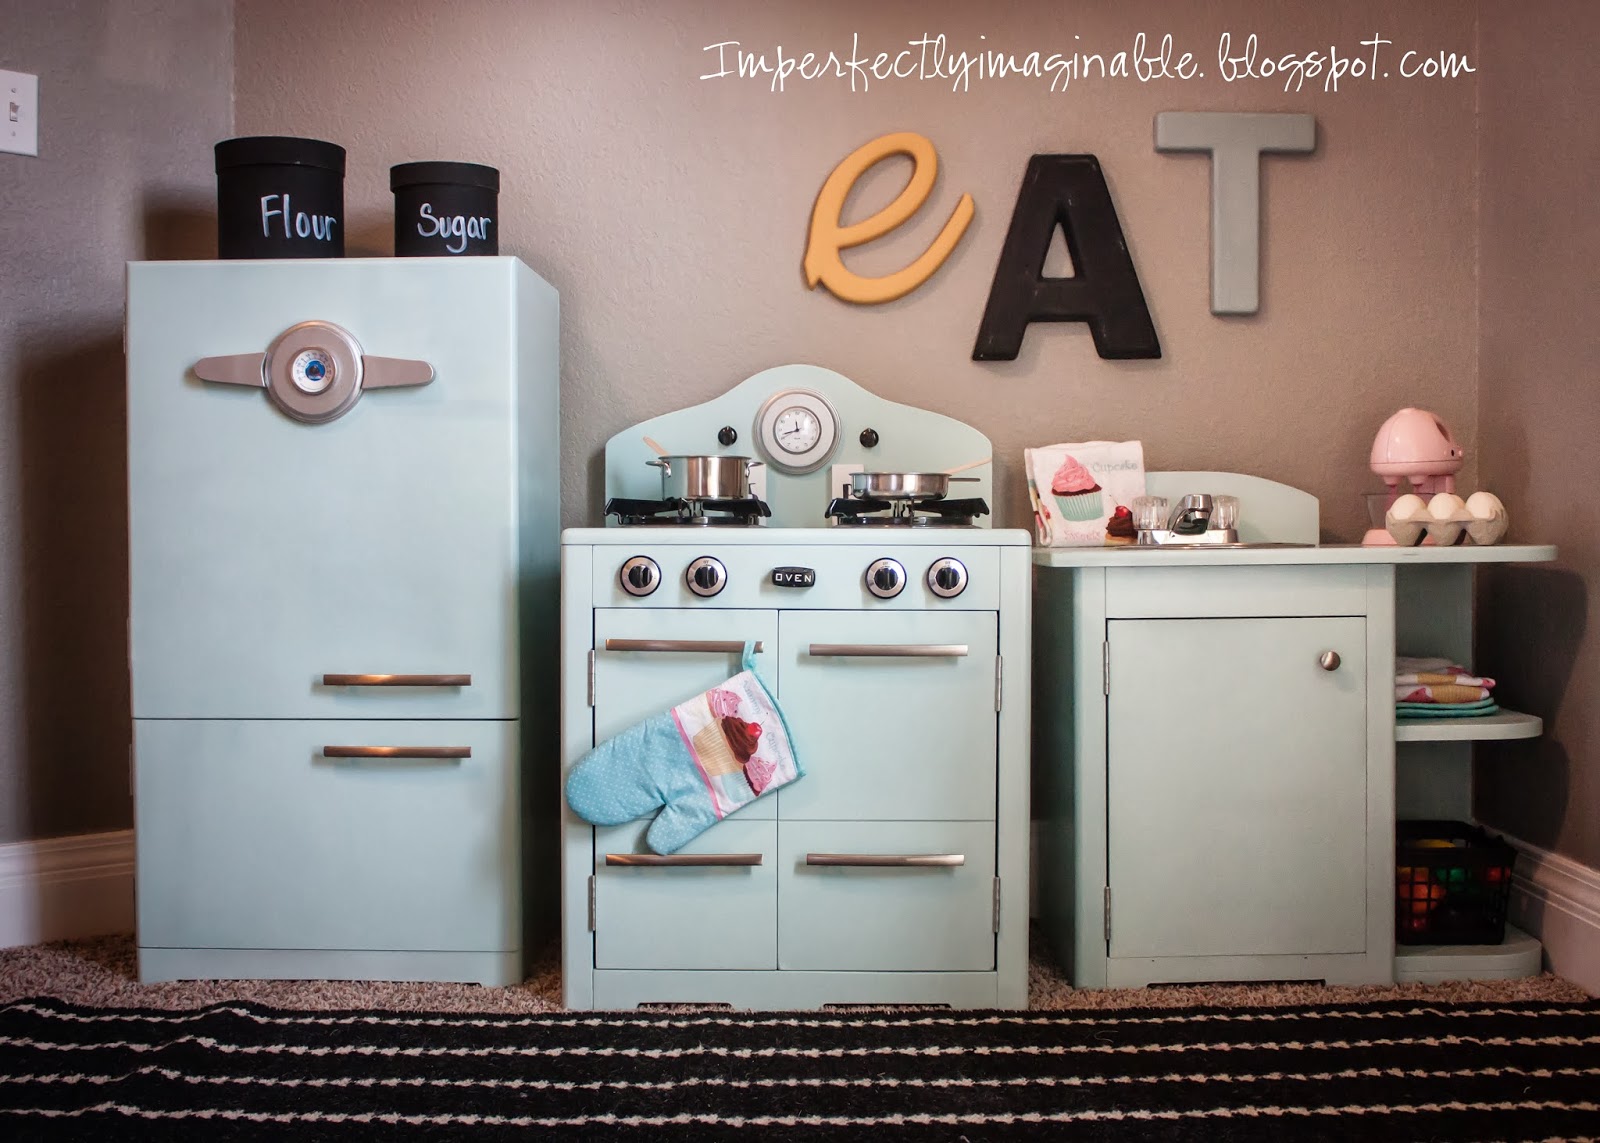 Imperfectly Imaginable : Pottery Barn Inspired retro kids kitchen. Finishing and plans